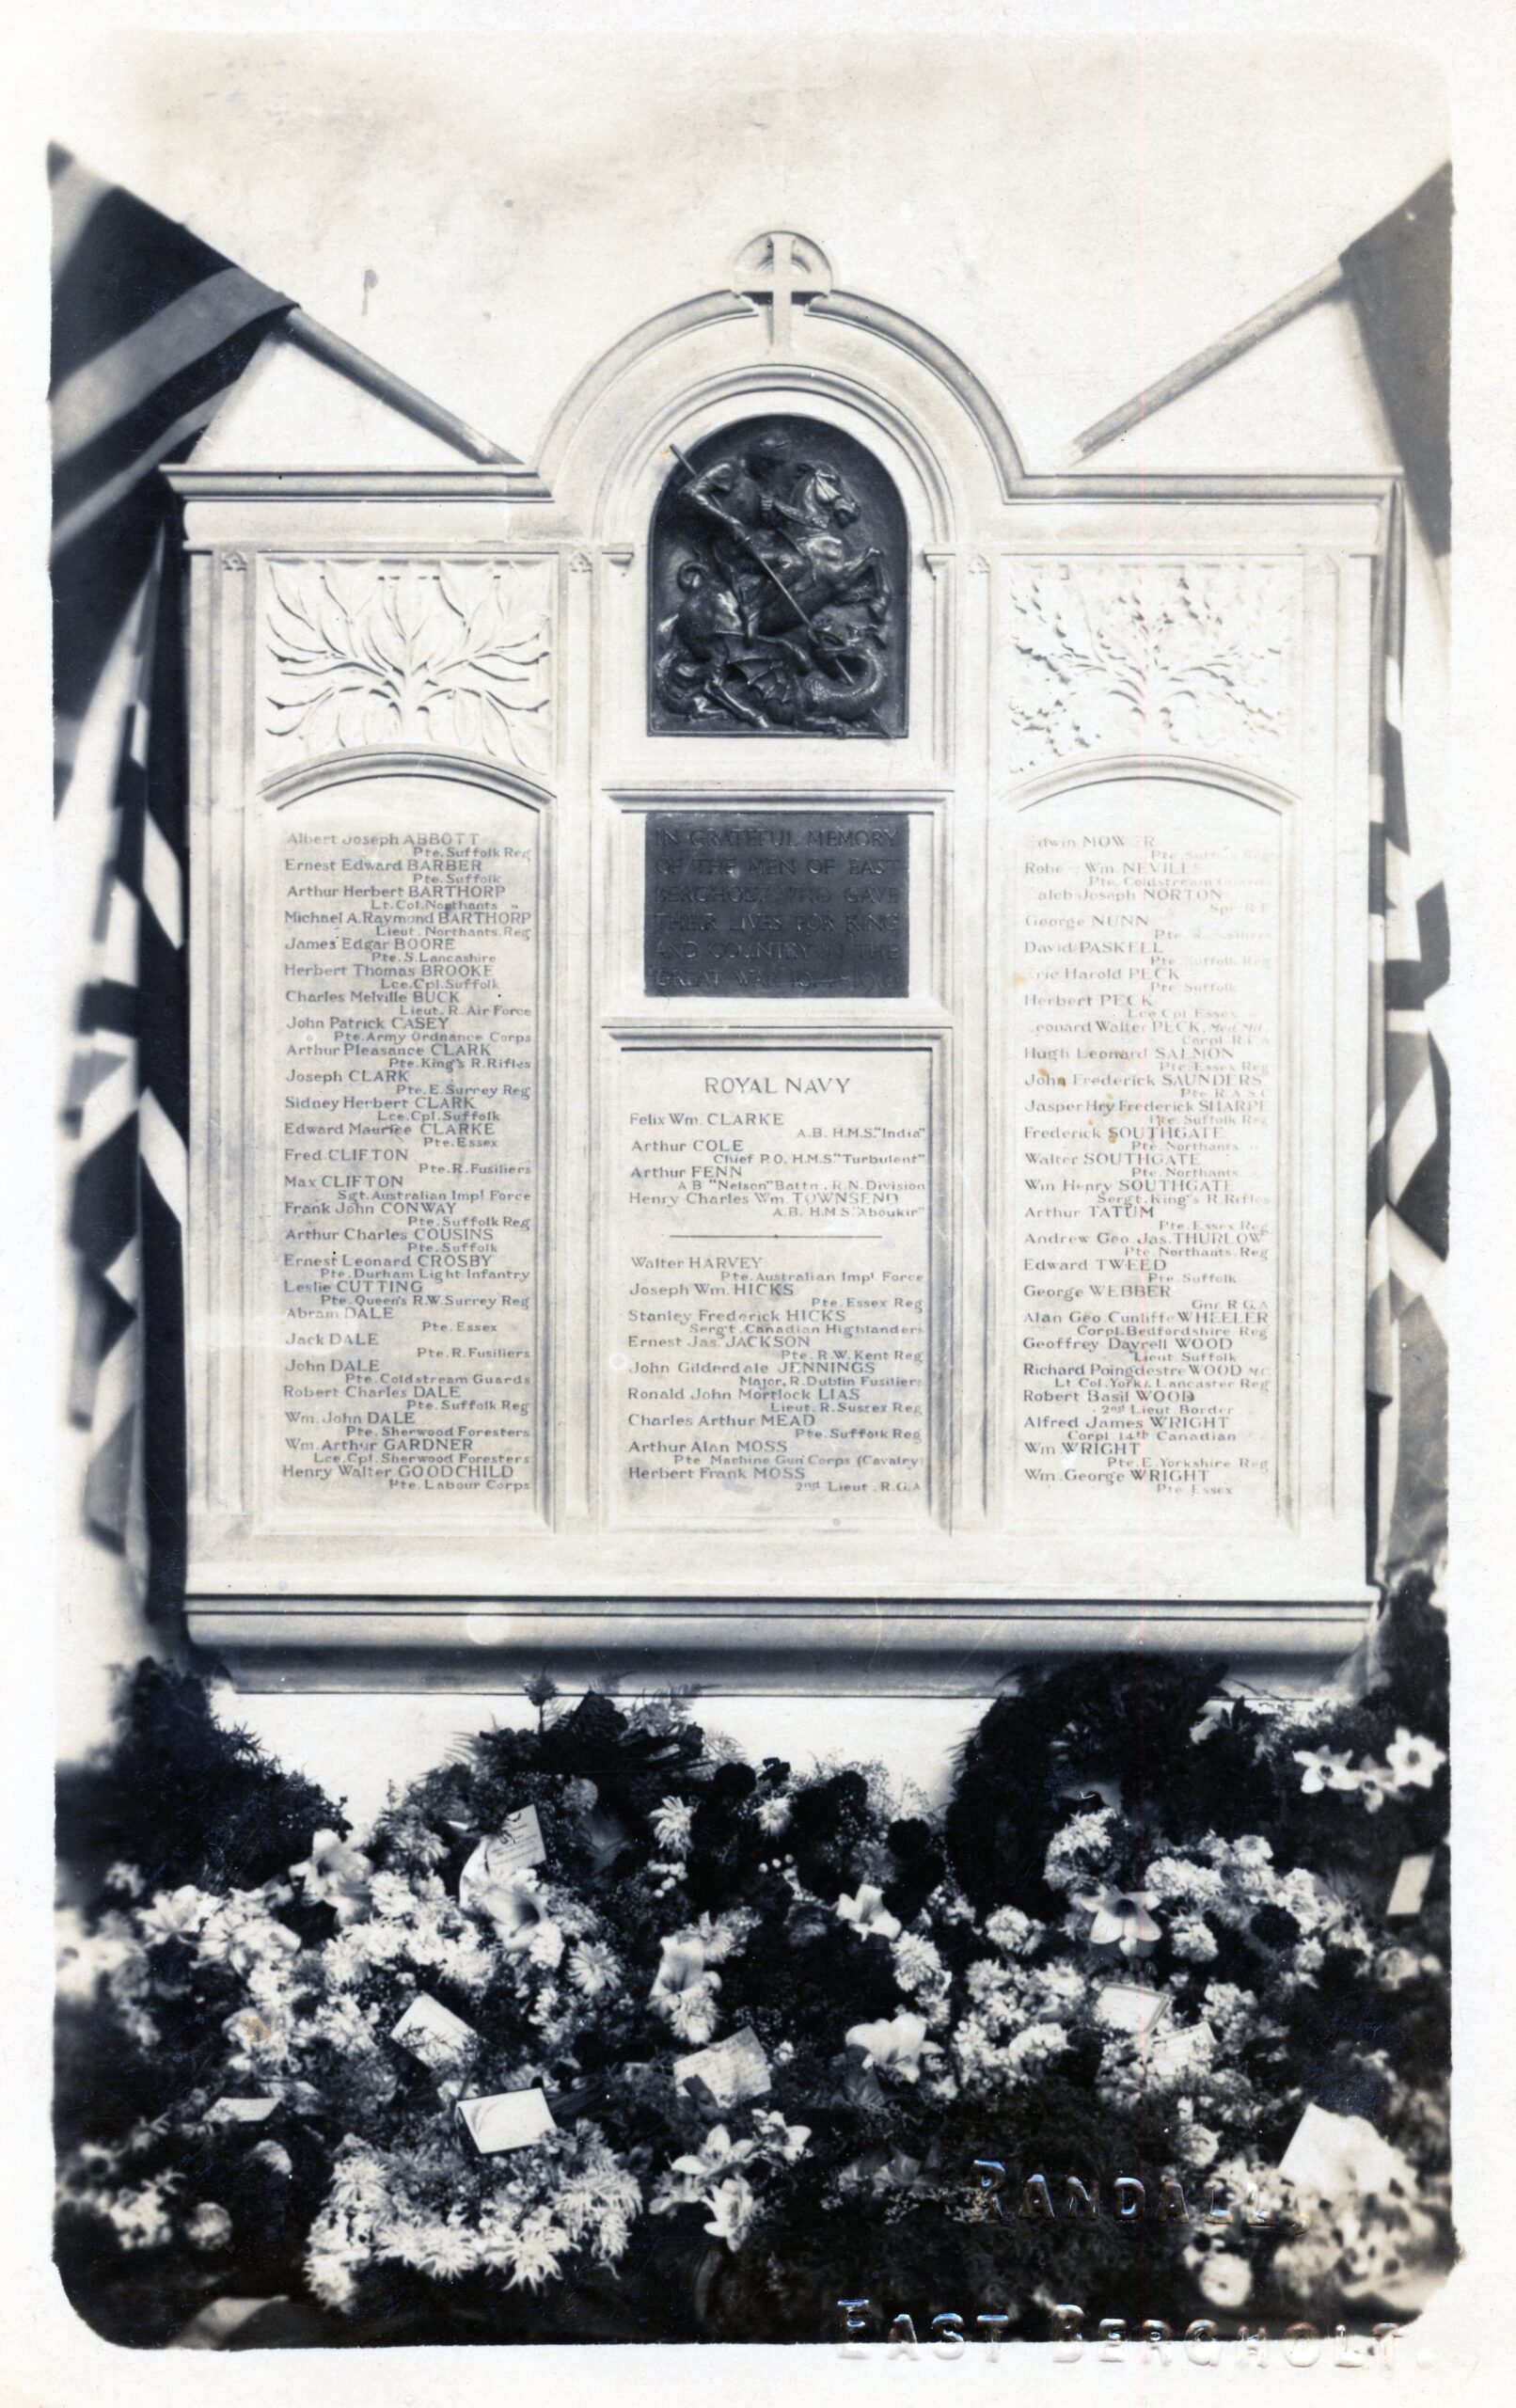 A Randall Postcard showing the Memorial shortly after it's unveiling  on 8 August 1920<br>Photographer H.A. Randall,circa August 1921  <br />Author's collection